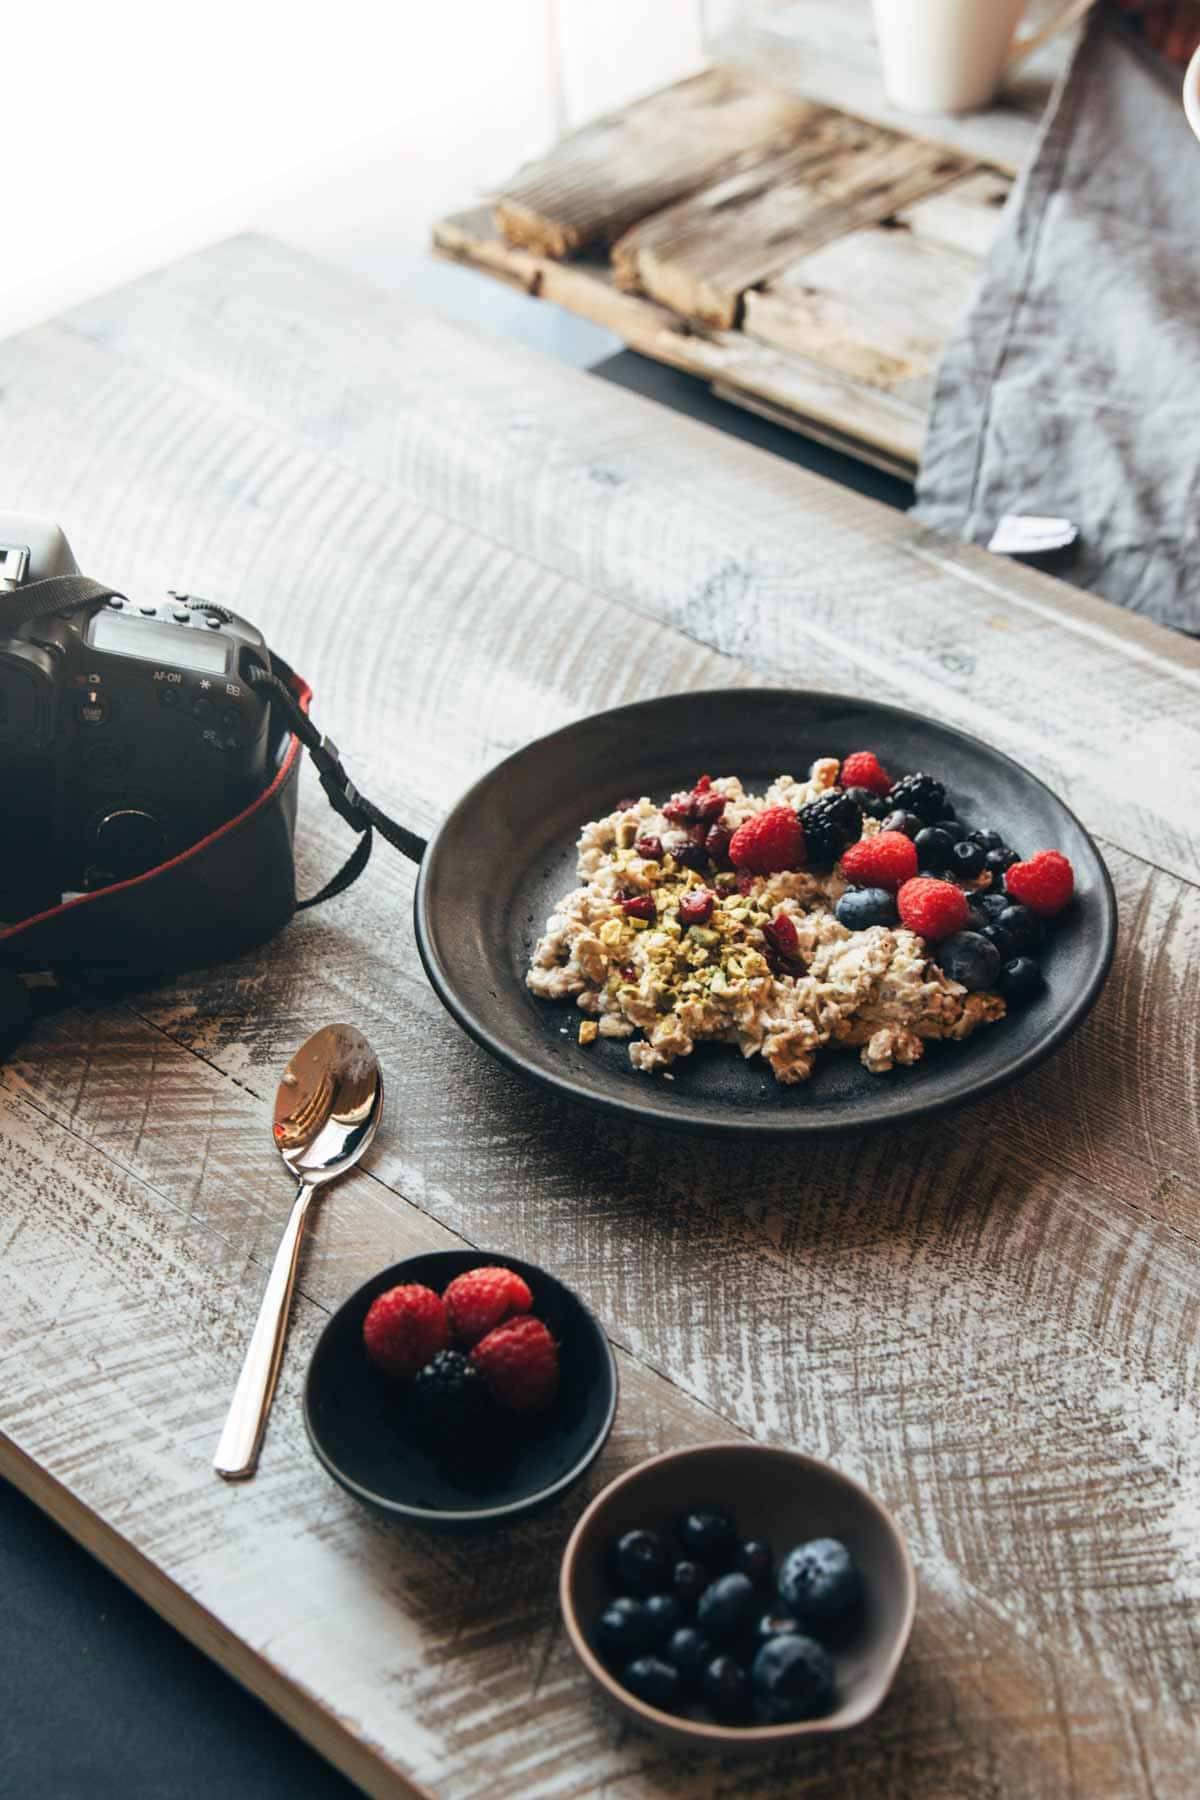 Plate with granola and berries with a camera and a spoon.